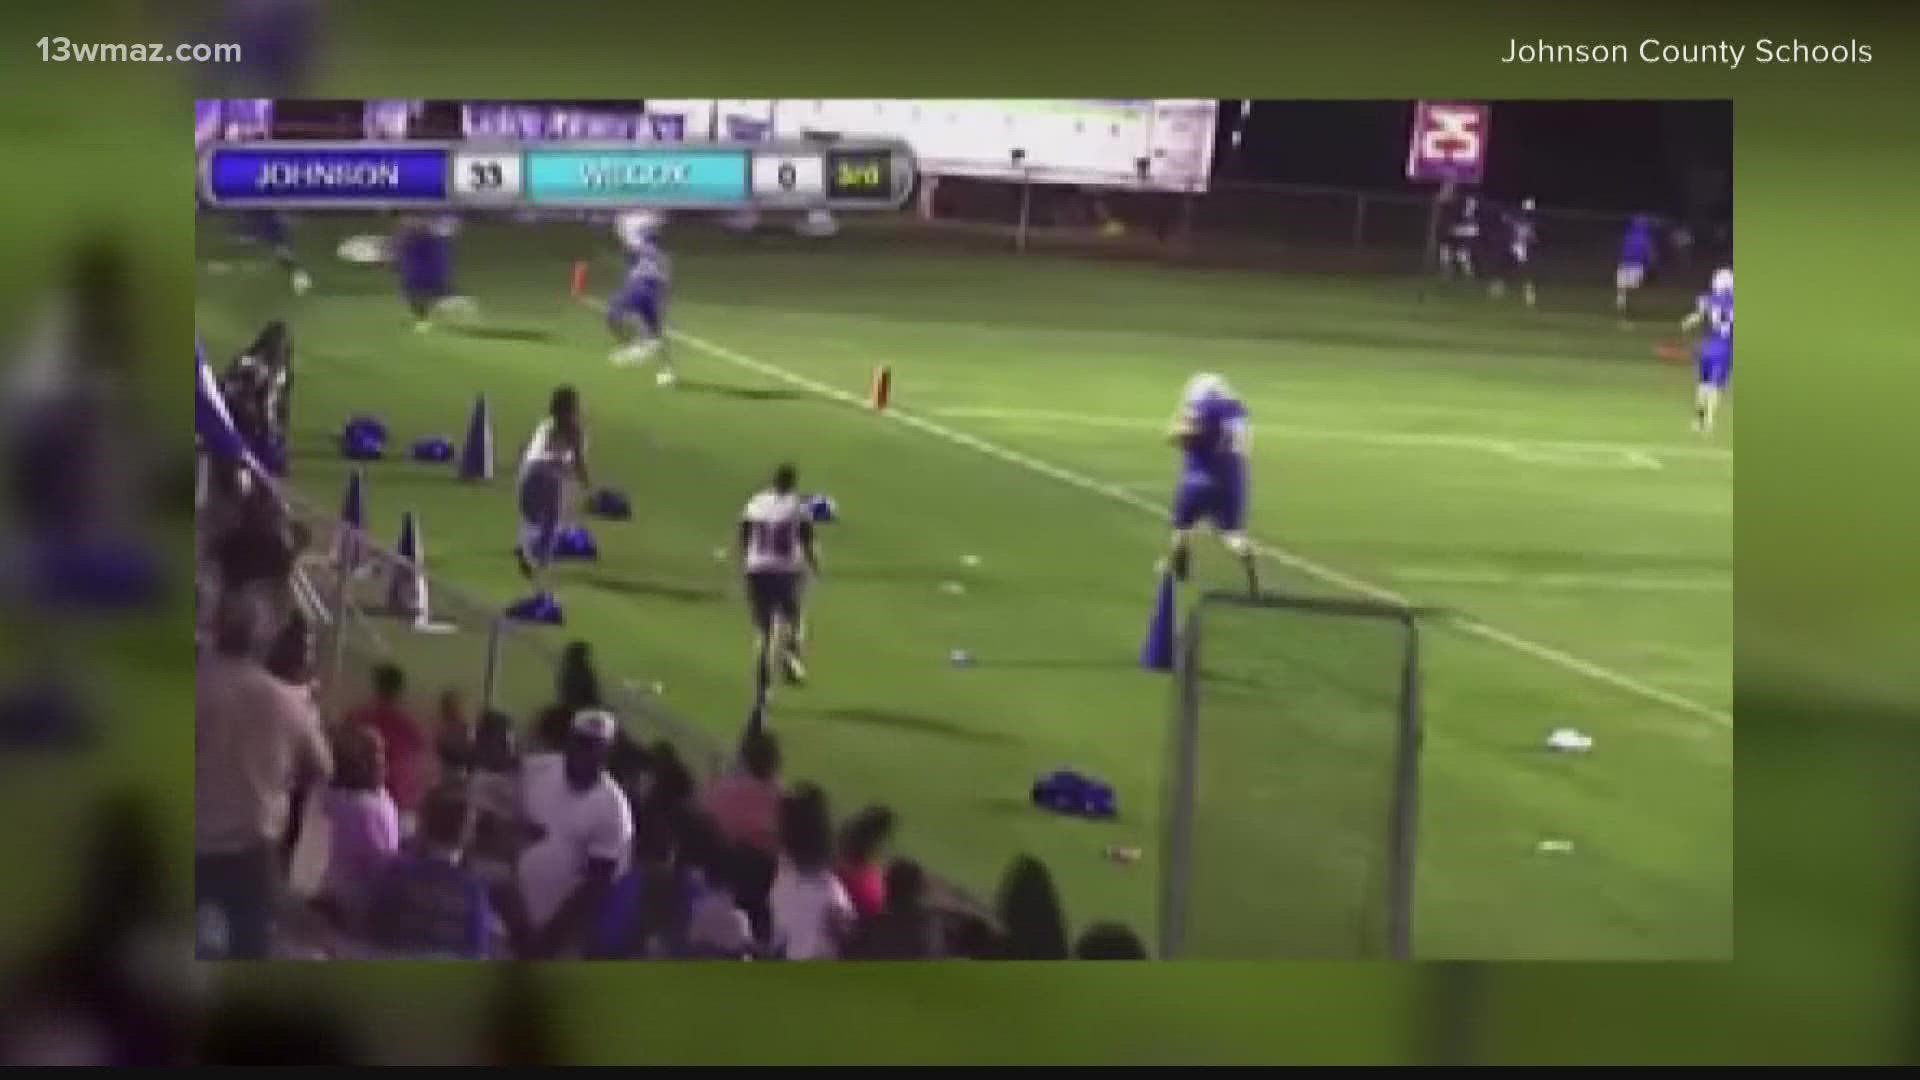 A Dublin man was arrested and charged for firing shots into the air during the scrimmage game.